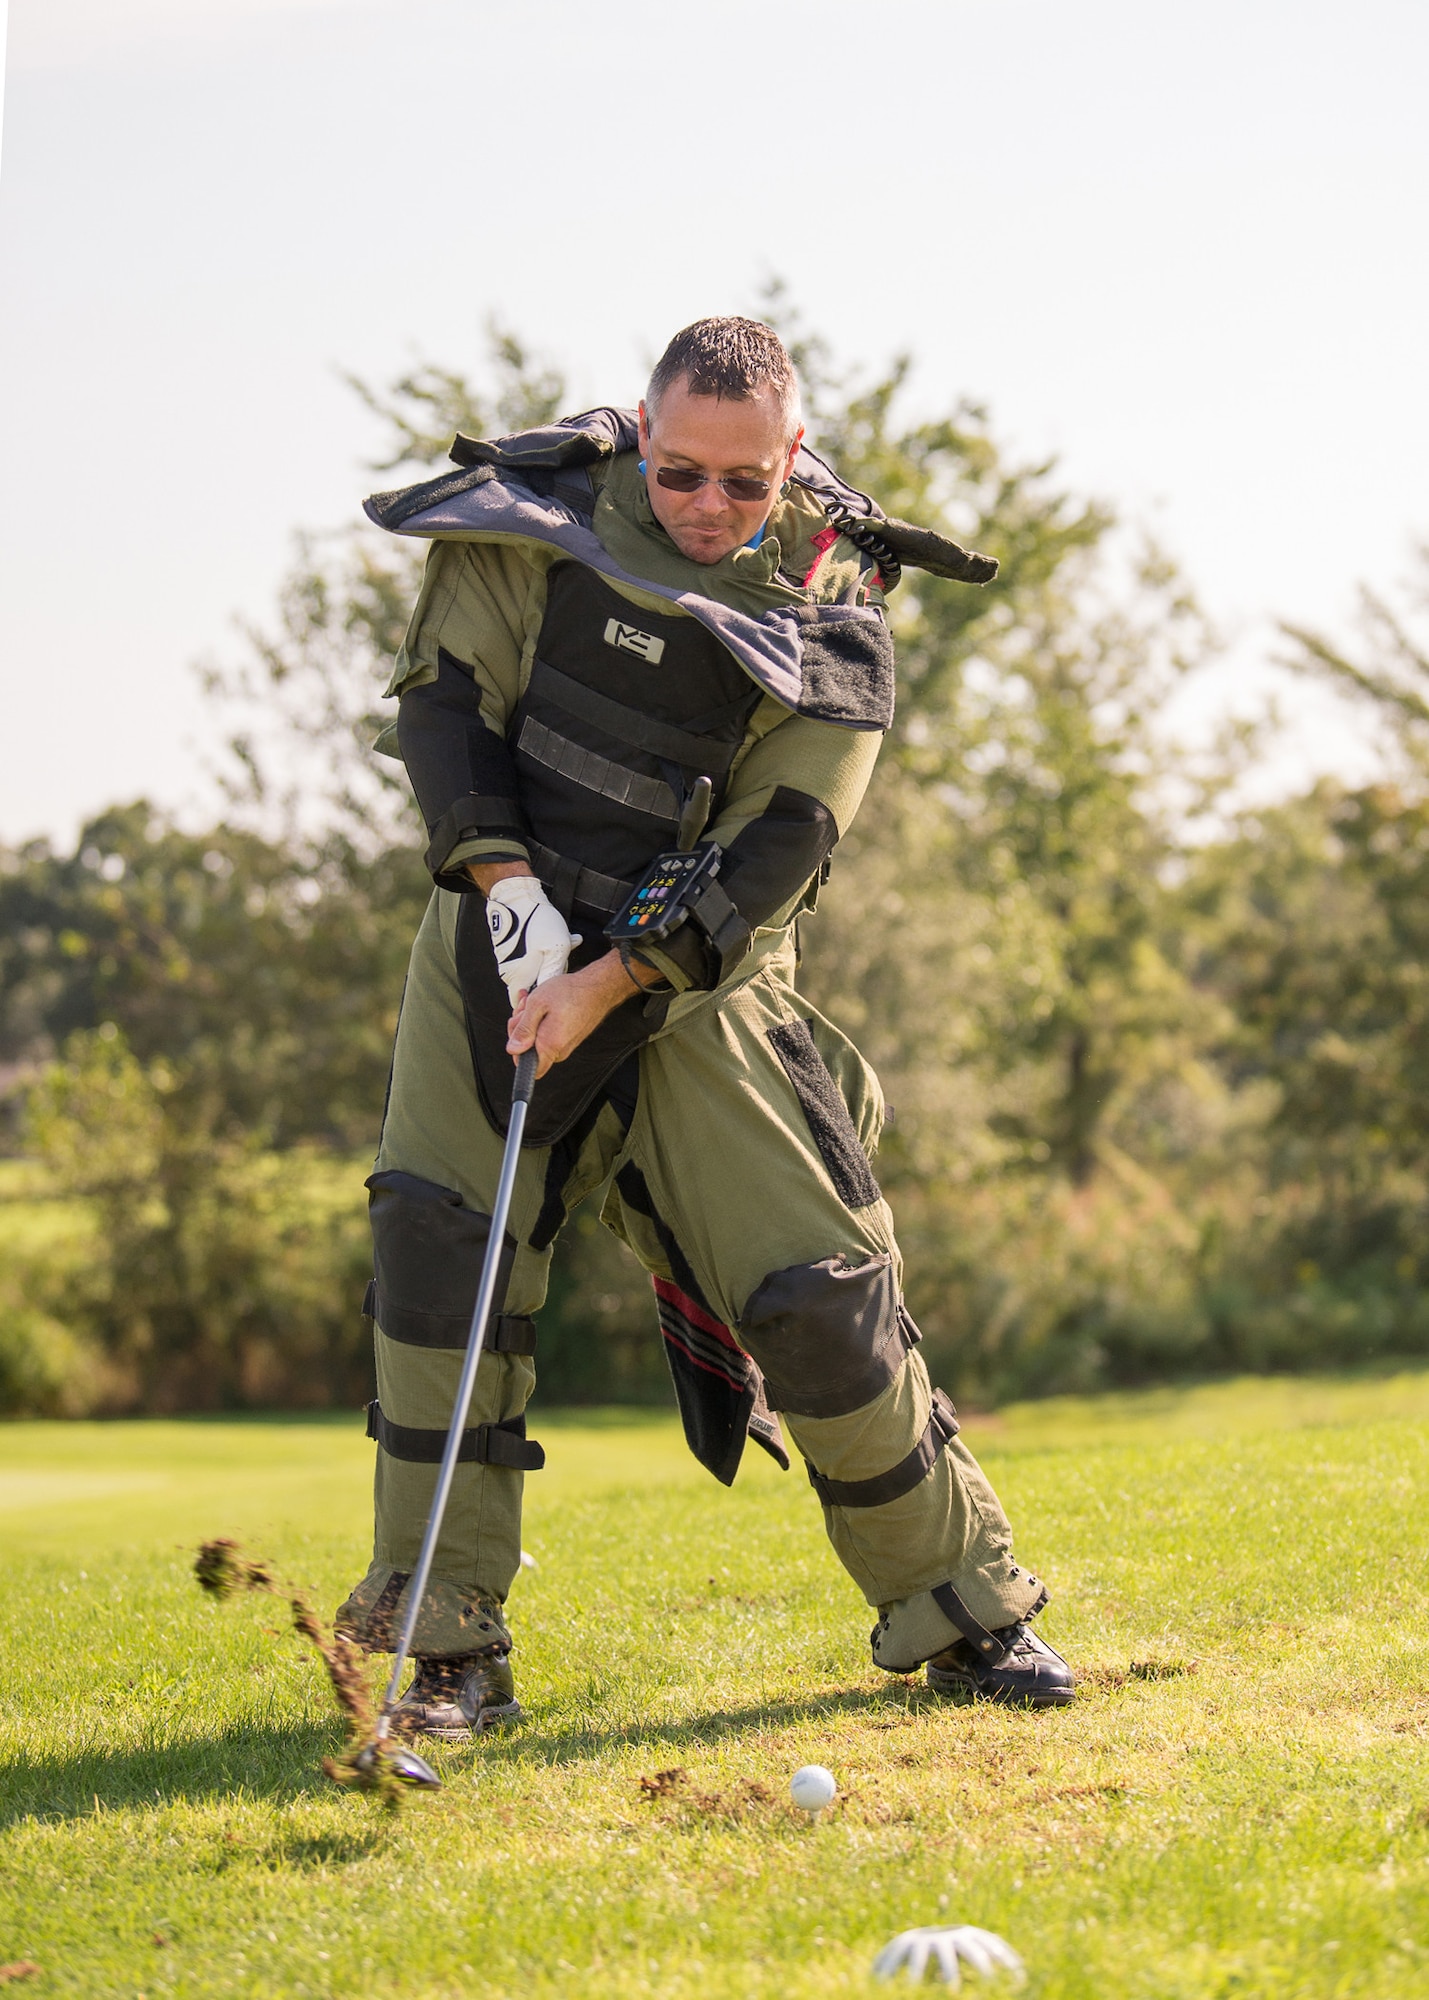 Lt. Col Jason Pennypacker, 512th Operations Group deputy commander, attempts to tee off while wearing an explosive ordnance disposal bomb suit at the Bluesuiters Golf Tournament Sept. 19, 2018, at the Eagle Creek Golf Course on Dover Air Force Base, Del. Teeing with the bomb suit was one of four special challenges set up throughout the 18-hole course.